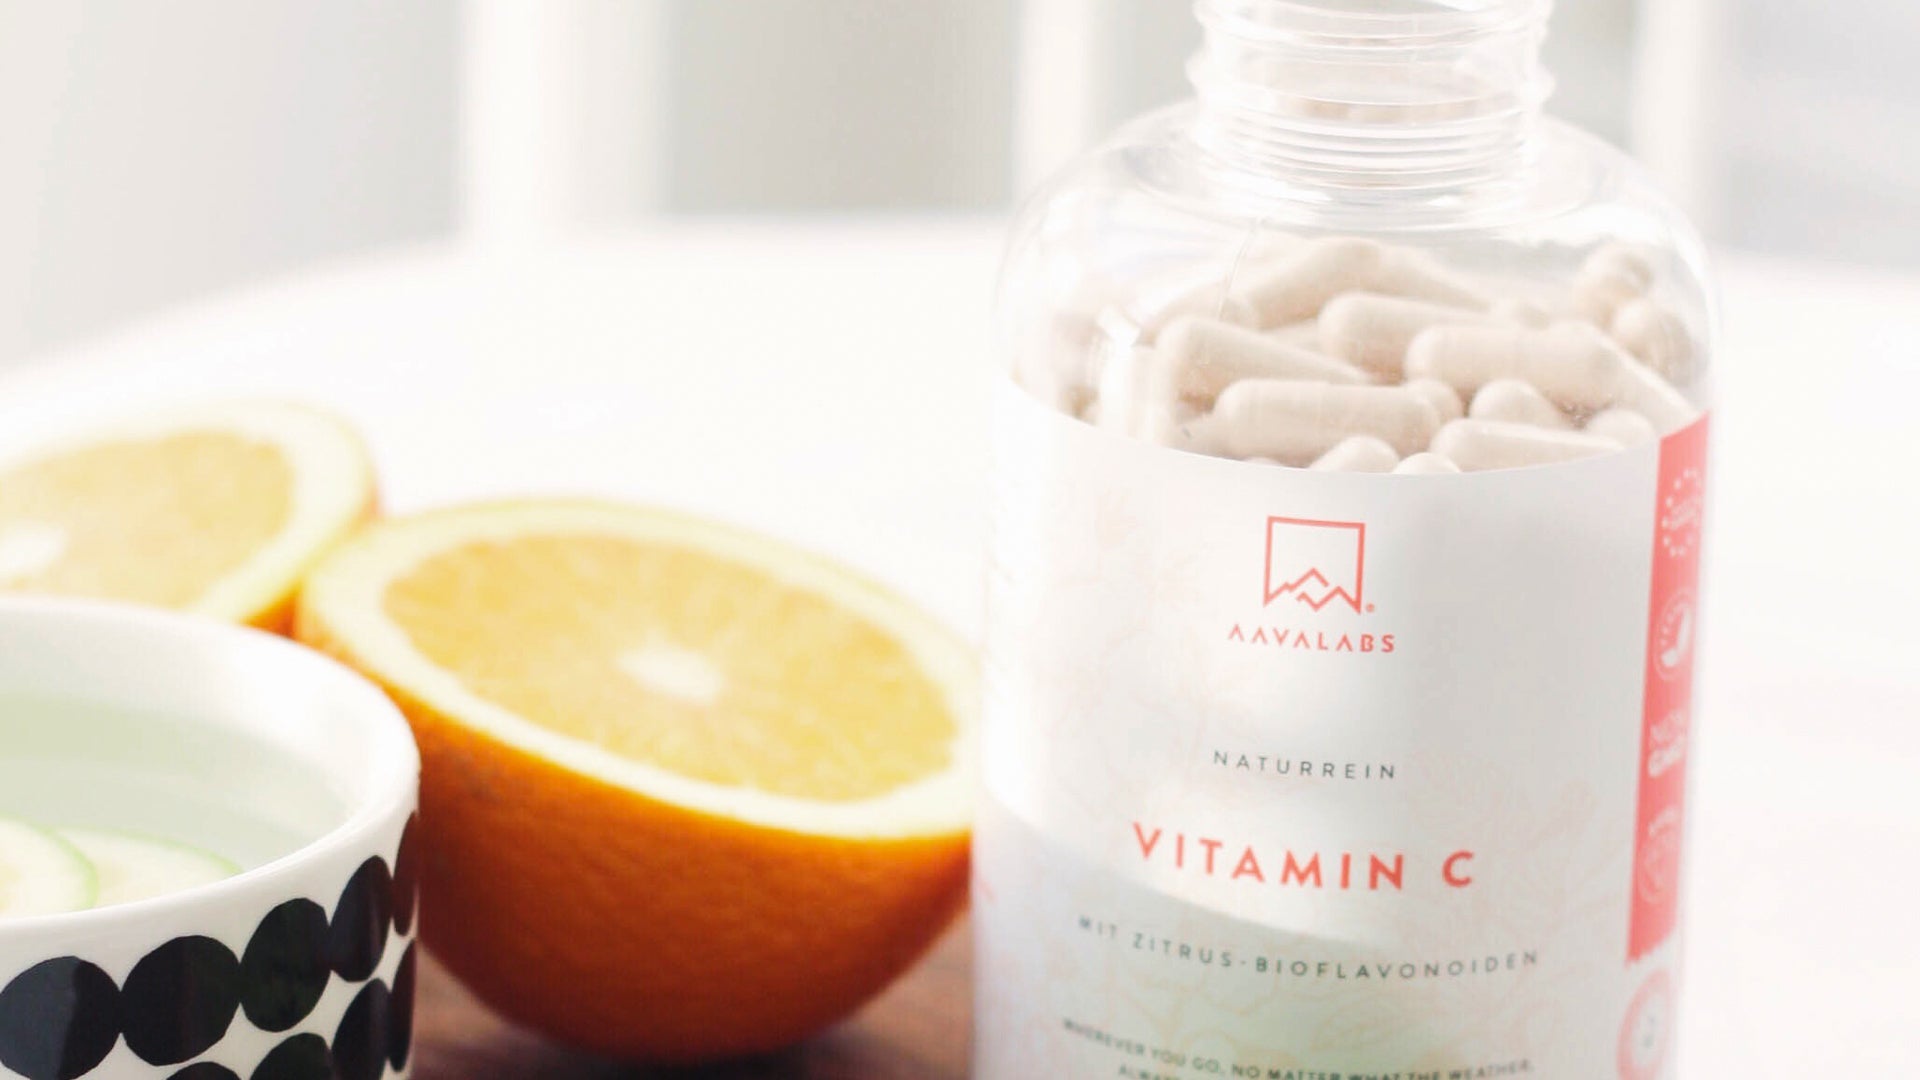 7 Amazing Health Benefits of Vitamin C Everyone Should Know